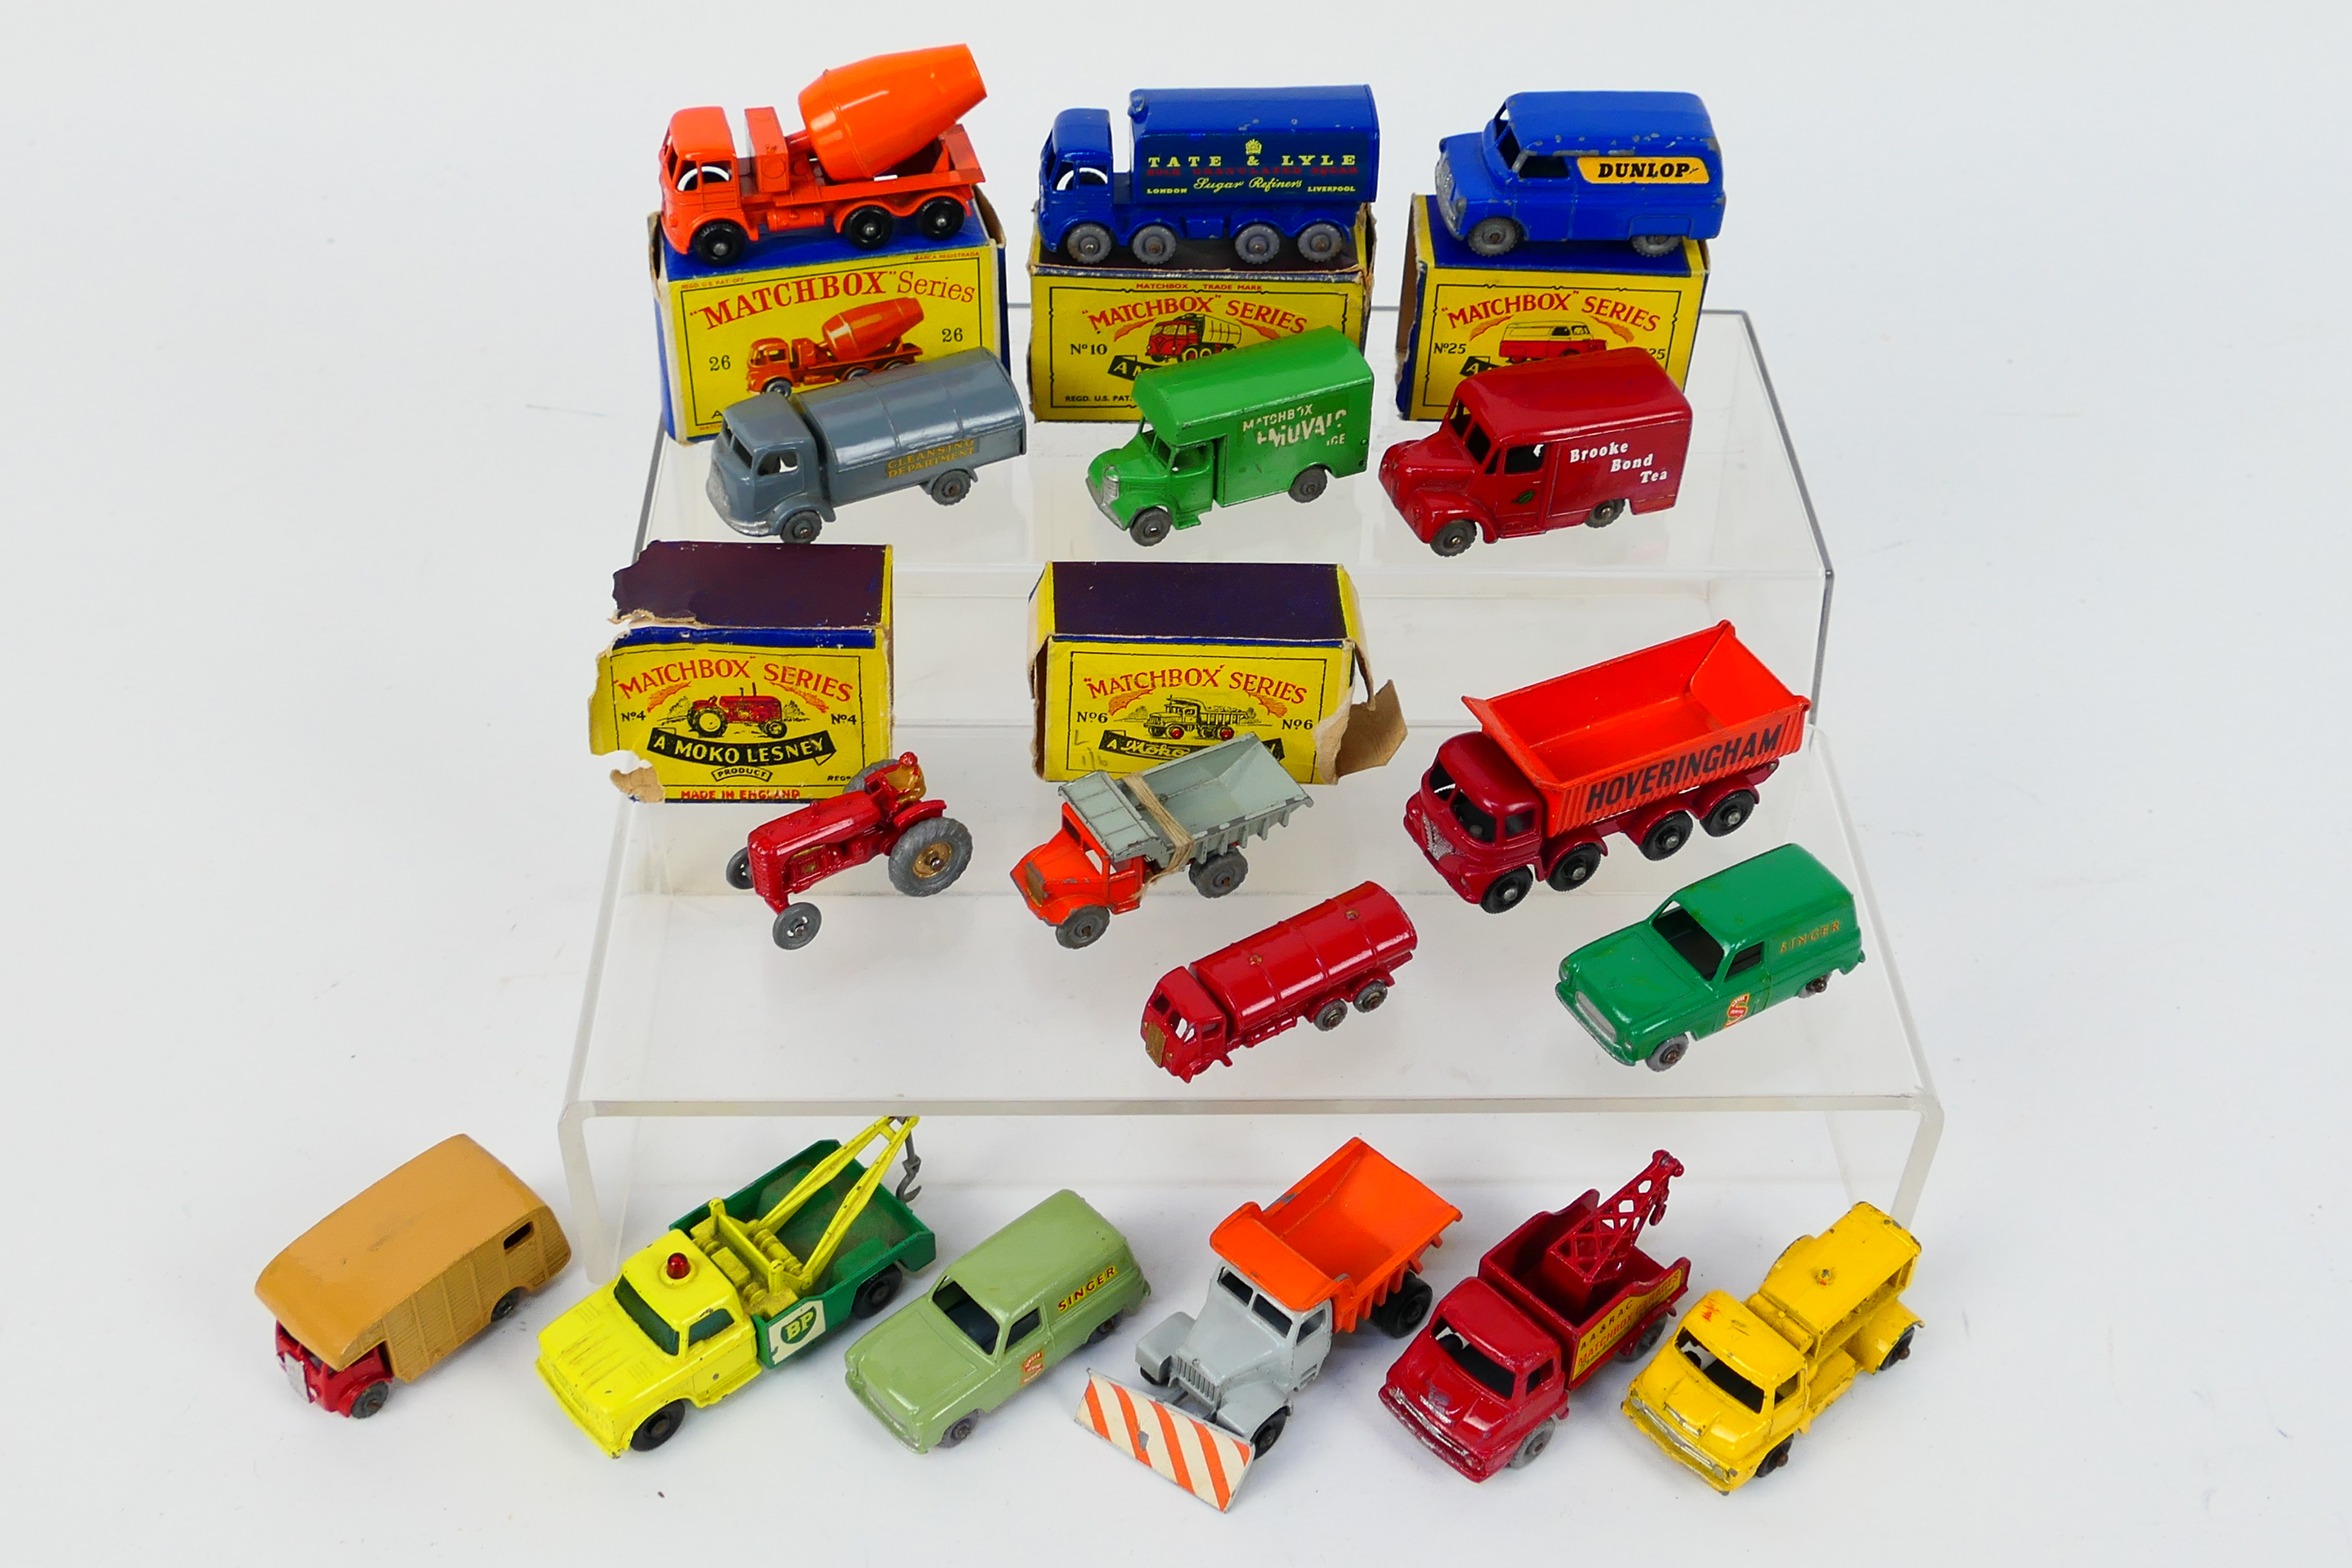 Matchbox - A collection of models including Ford Thames van in green # 59, Trojan van # 47,